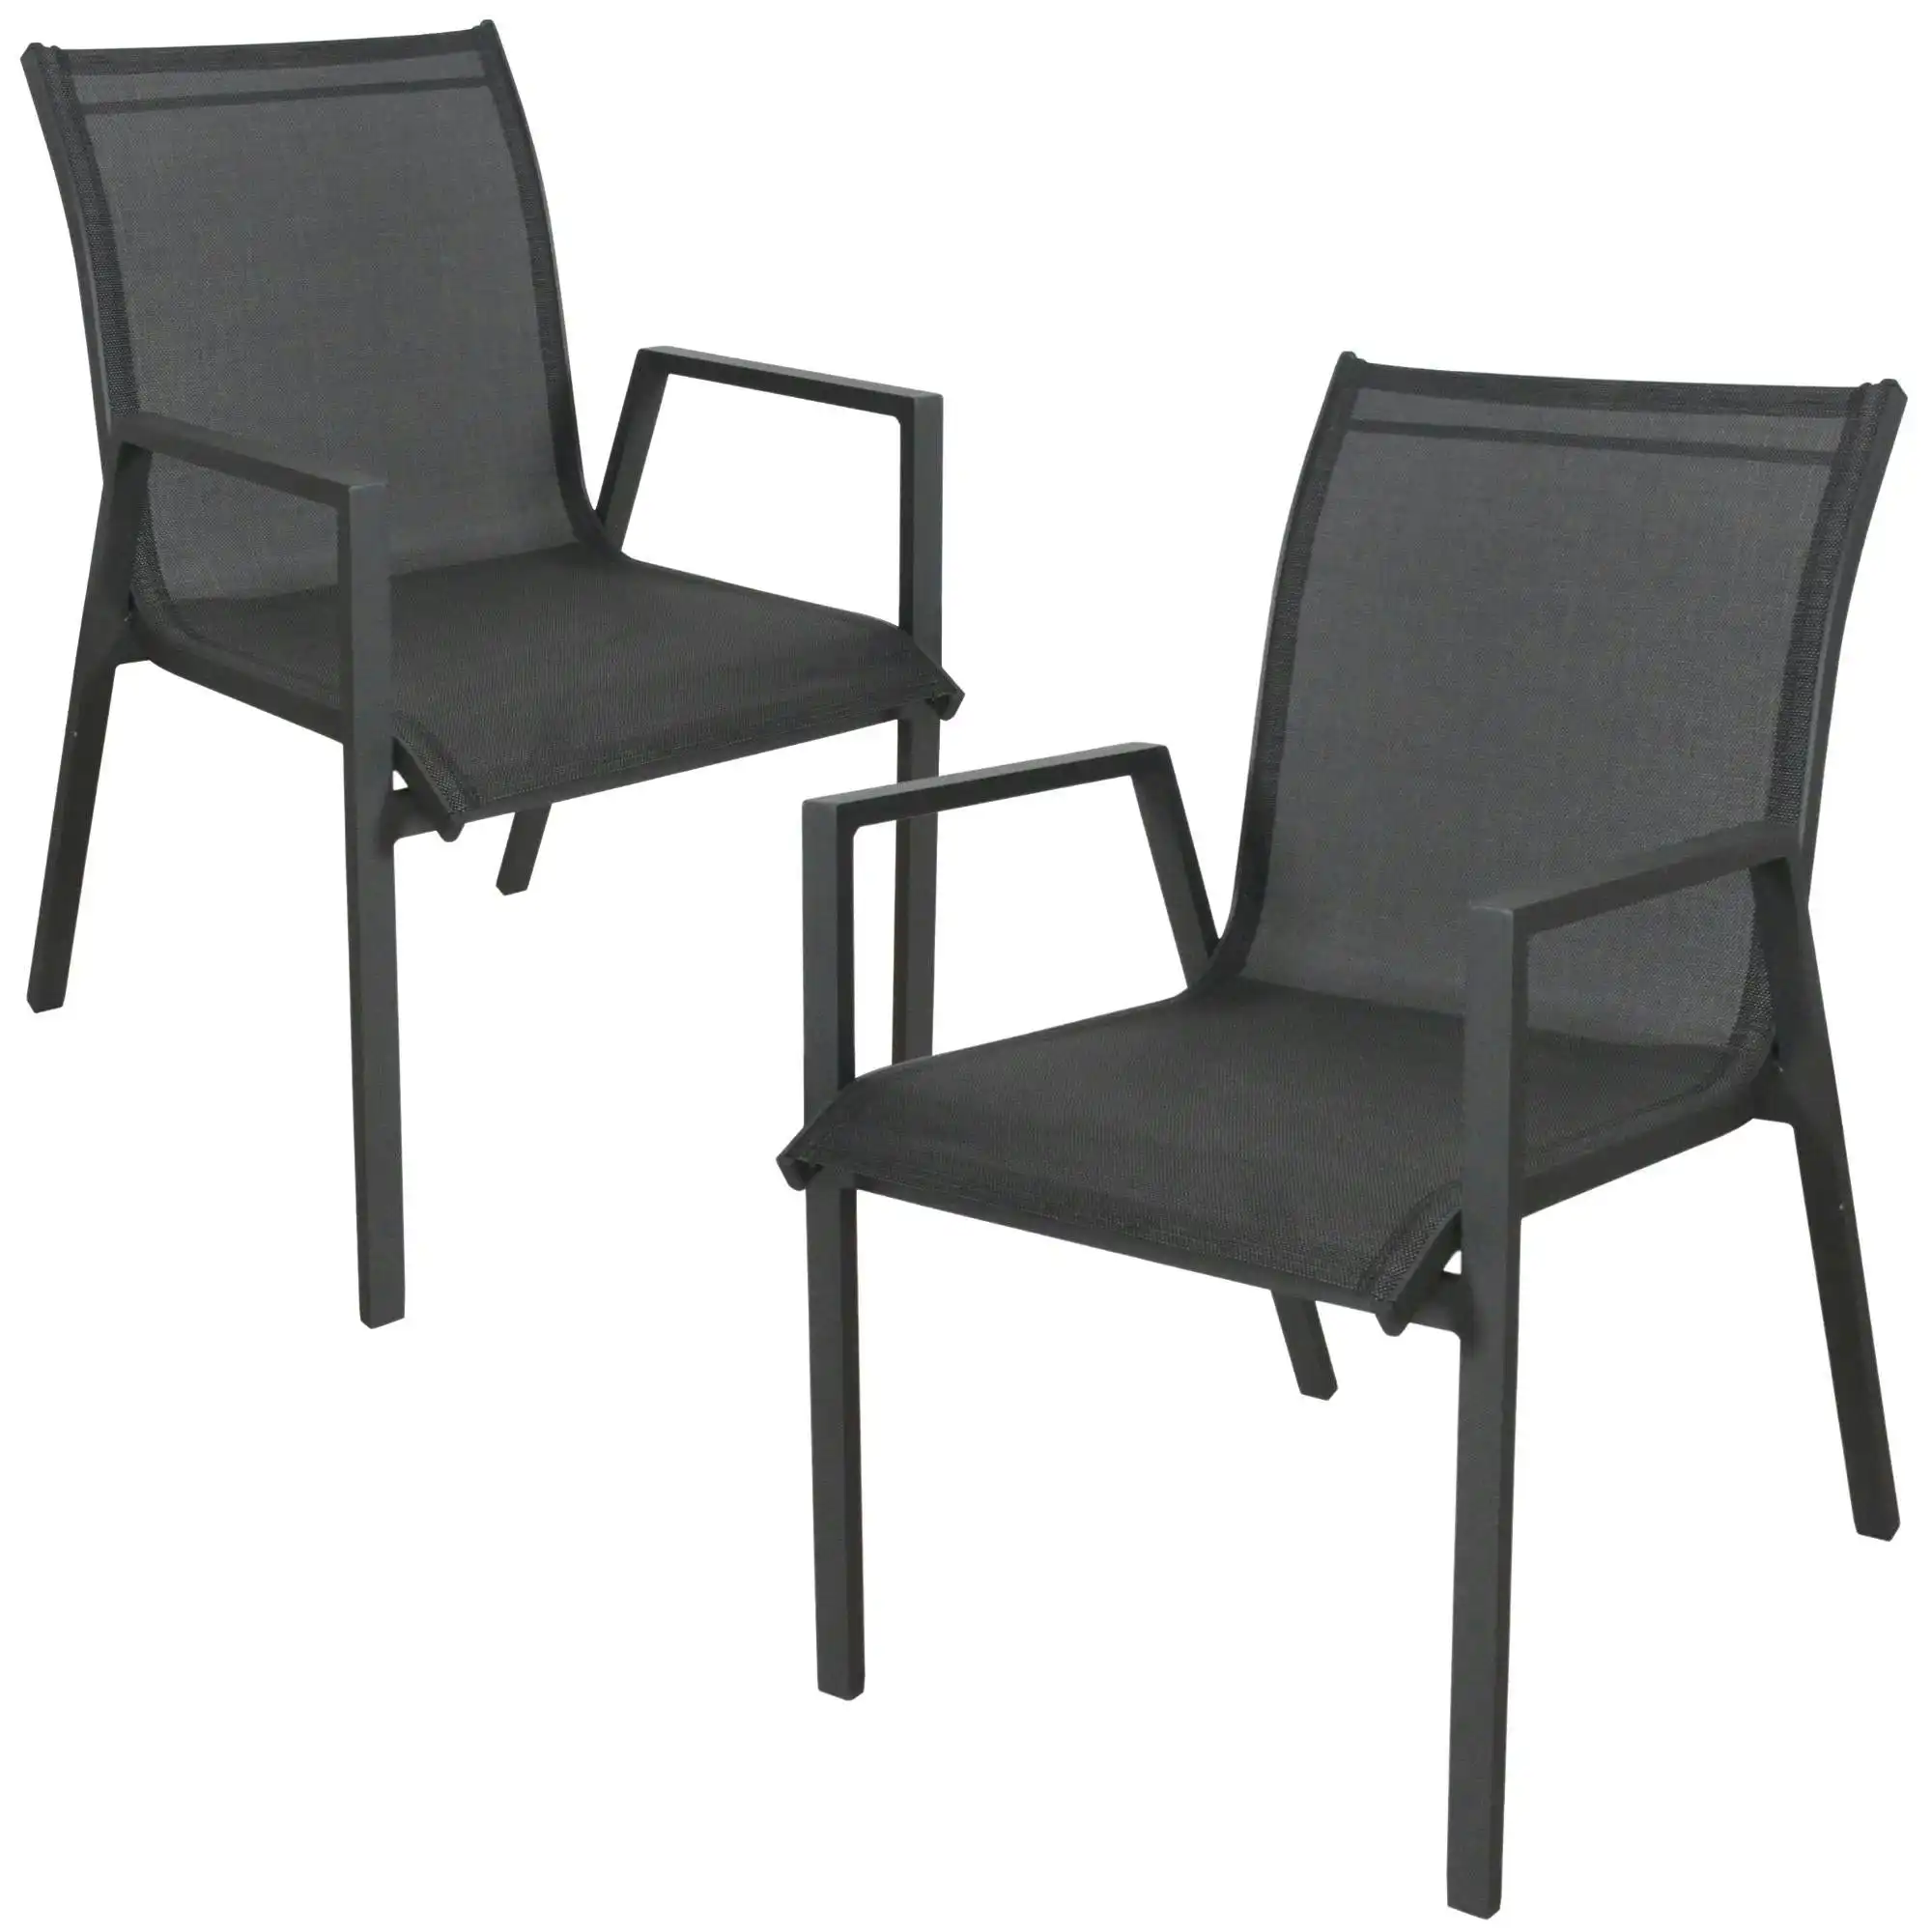 Iberia 2pc Set Outdoor Dining Chair